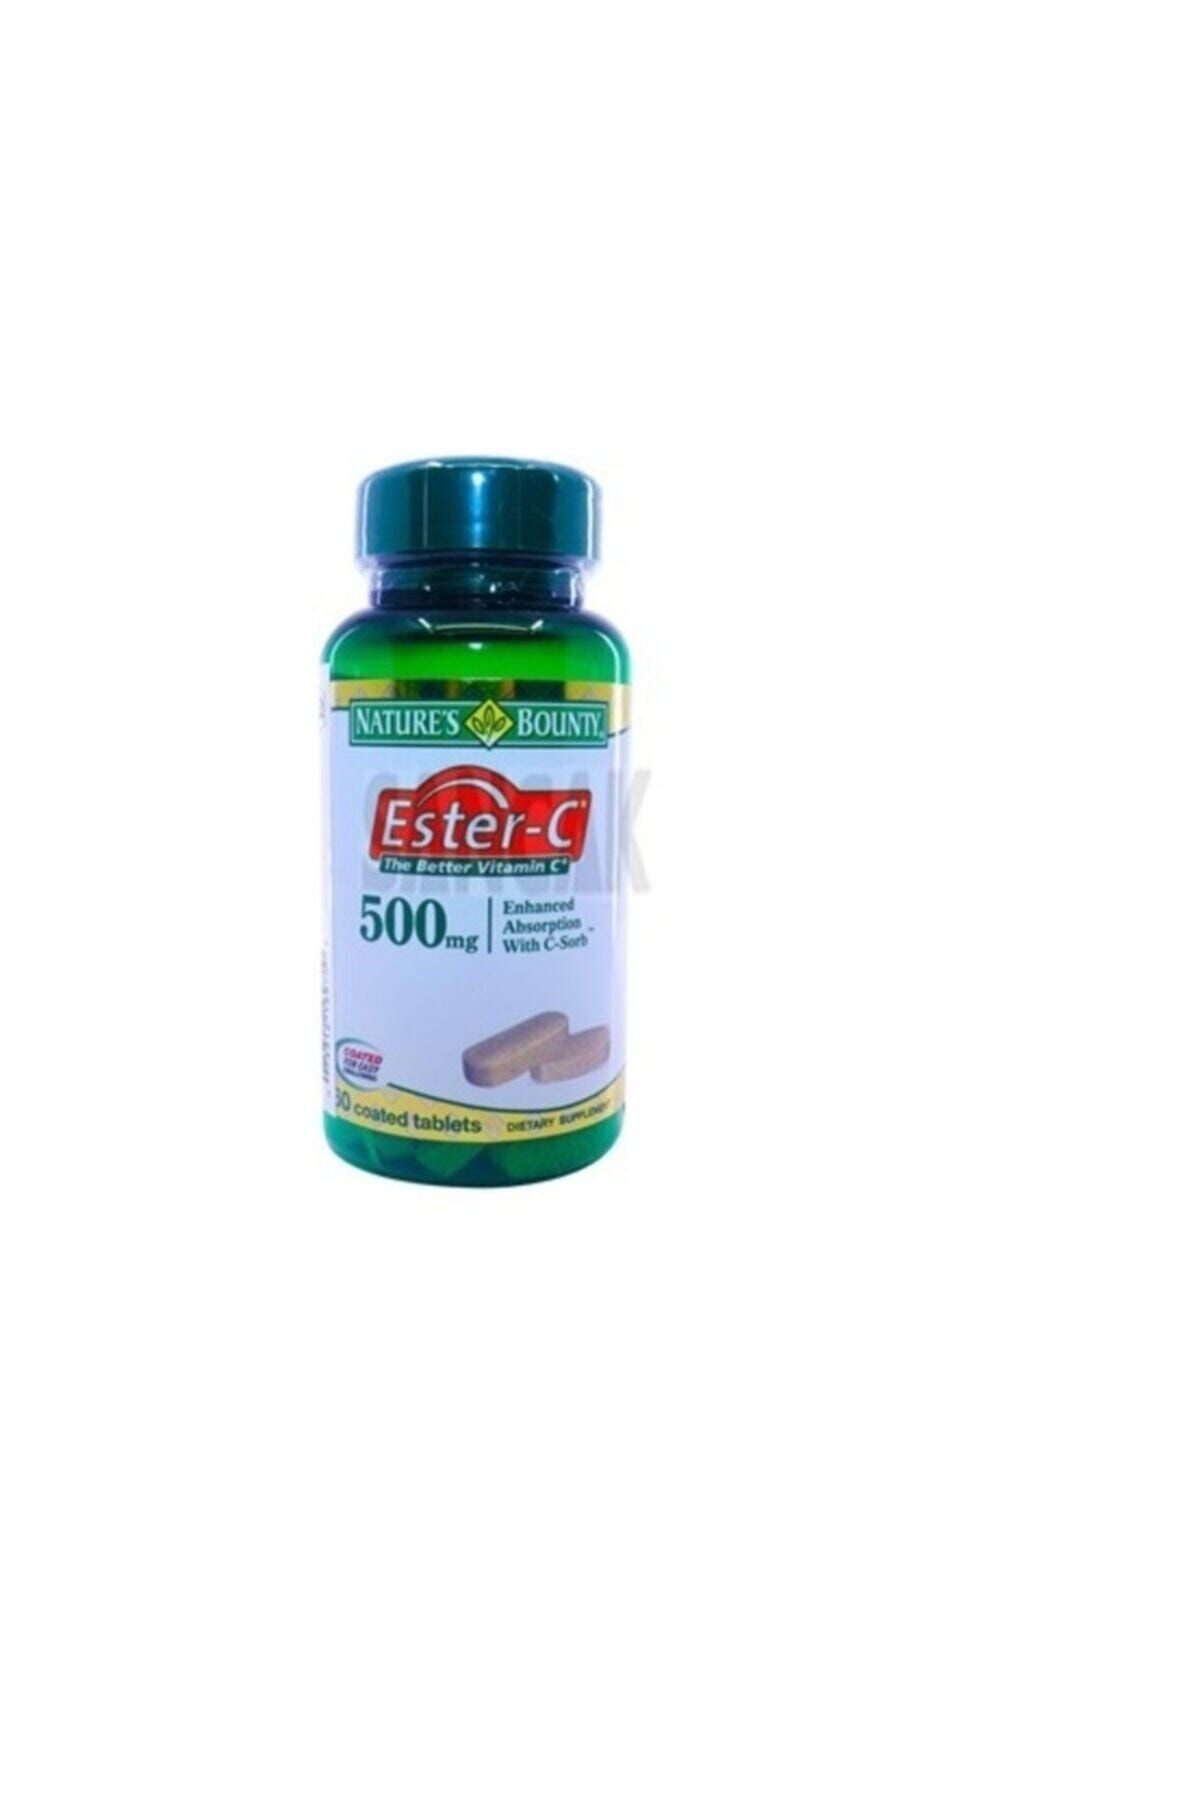 Natures Bounty Ester-c 500 Mg 60 Tablet